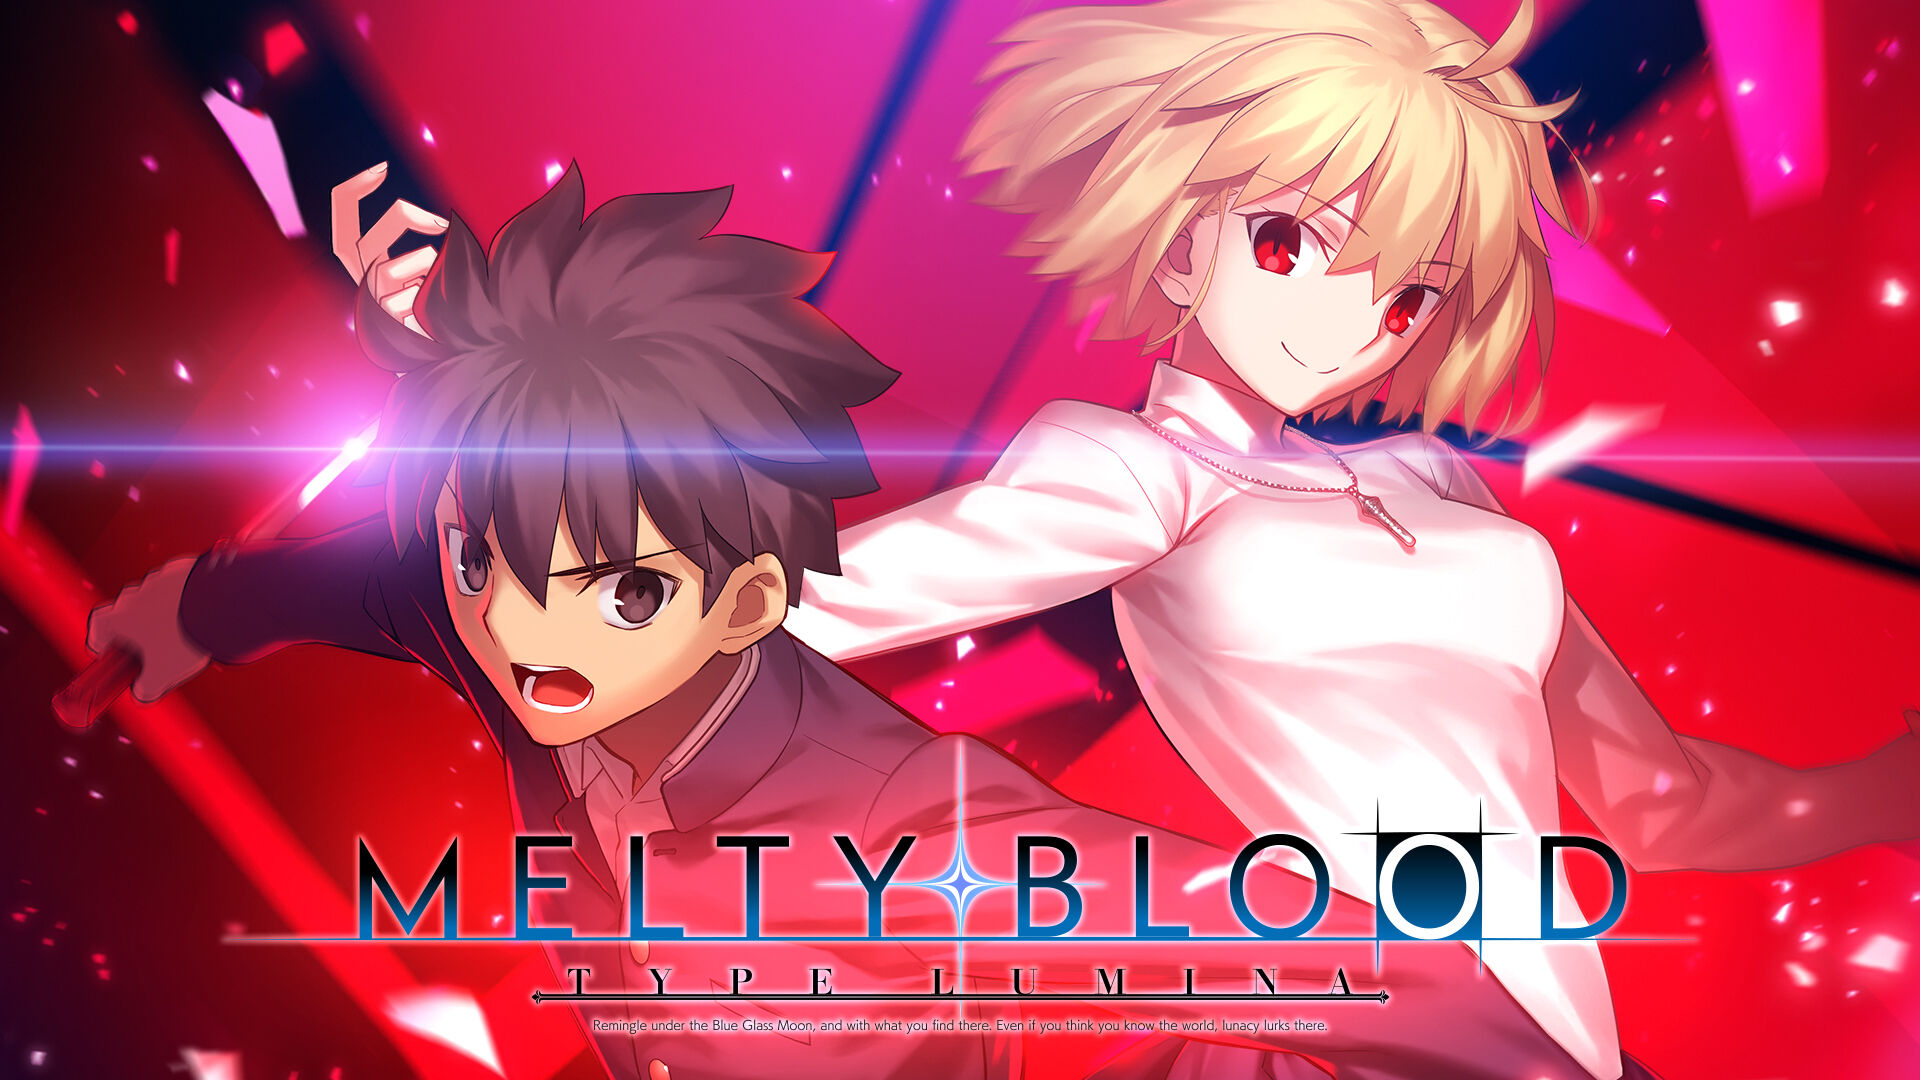 melty blood type lumina review